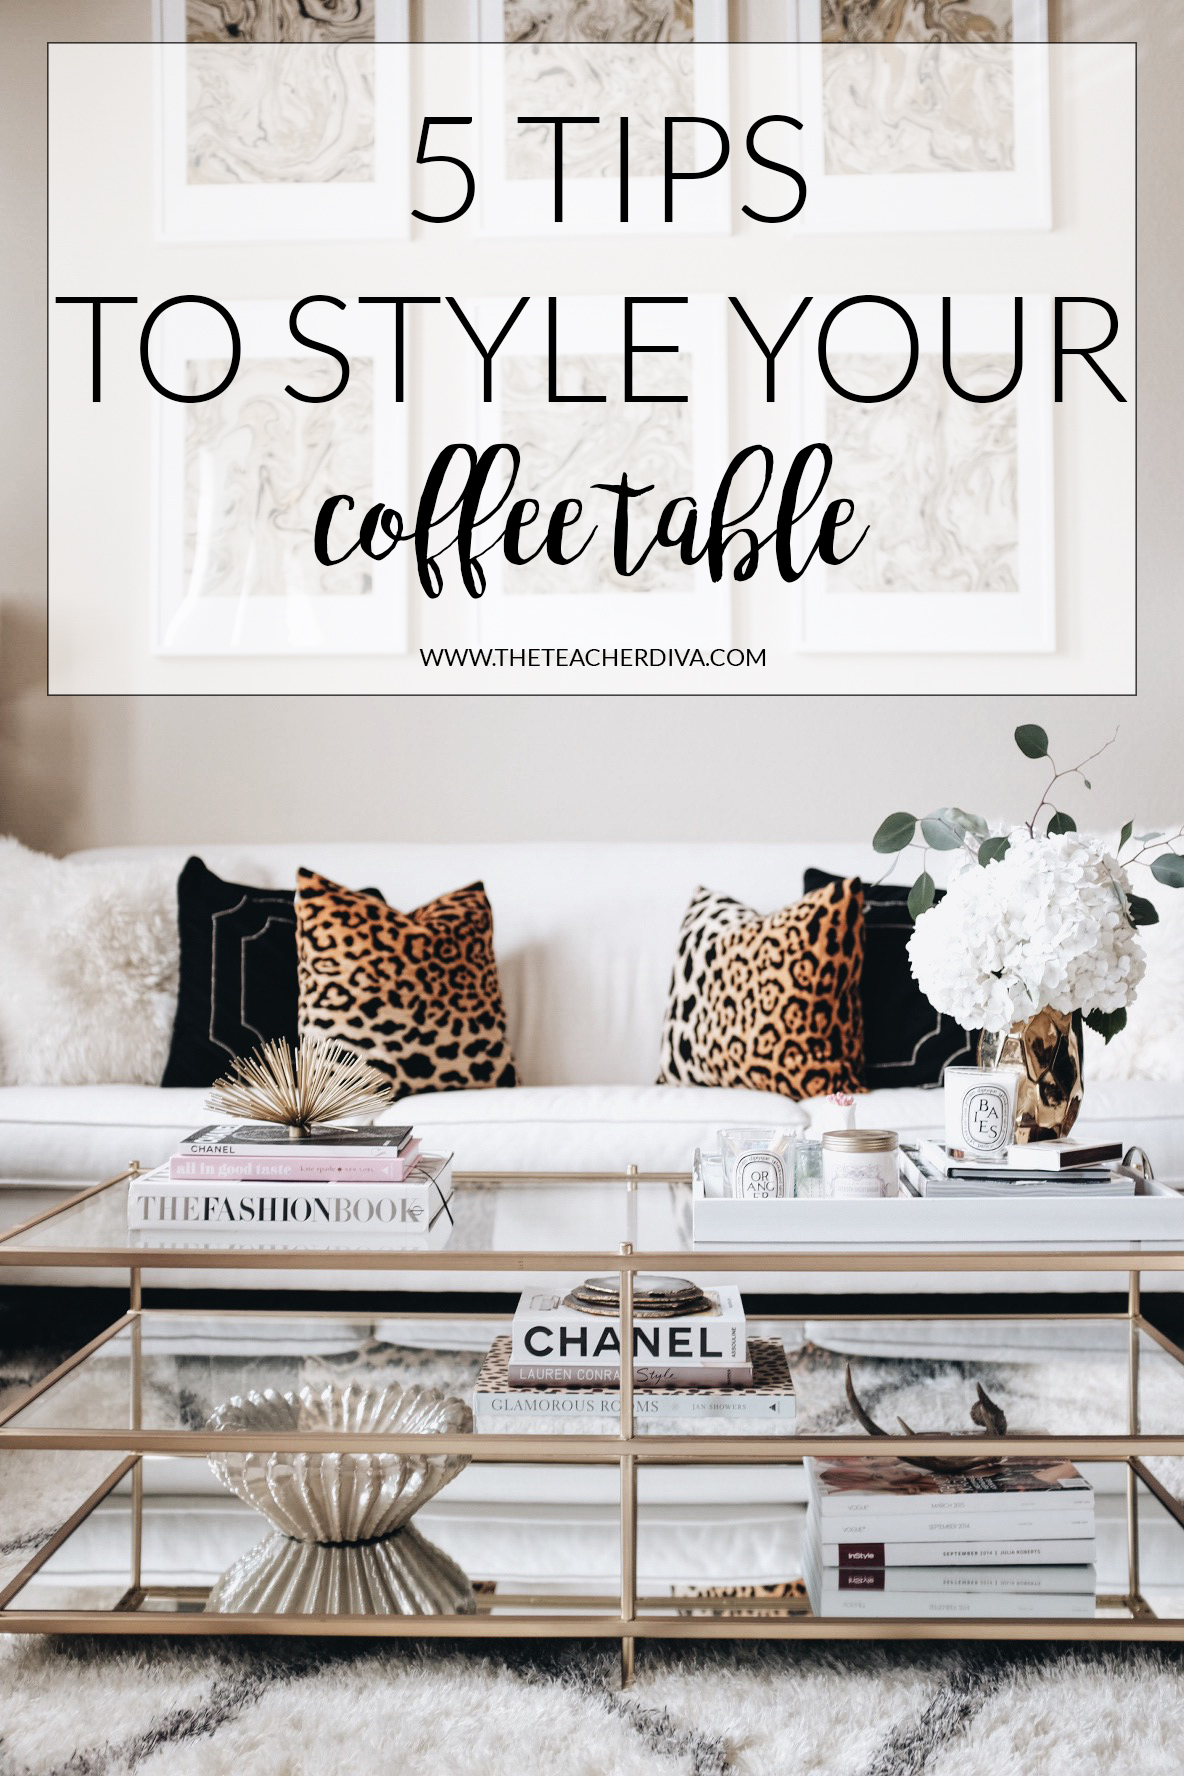 9 Most Beautiful Books for Your Home  Chanel coffee table book, Coffee  table styling, Decorating coffee tables